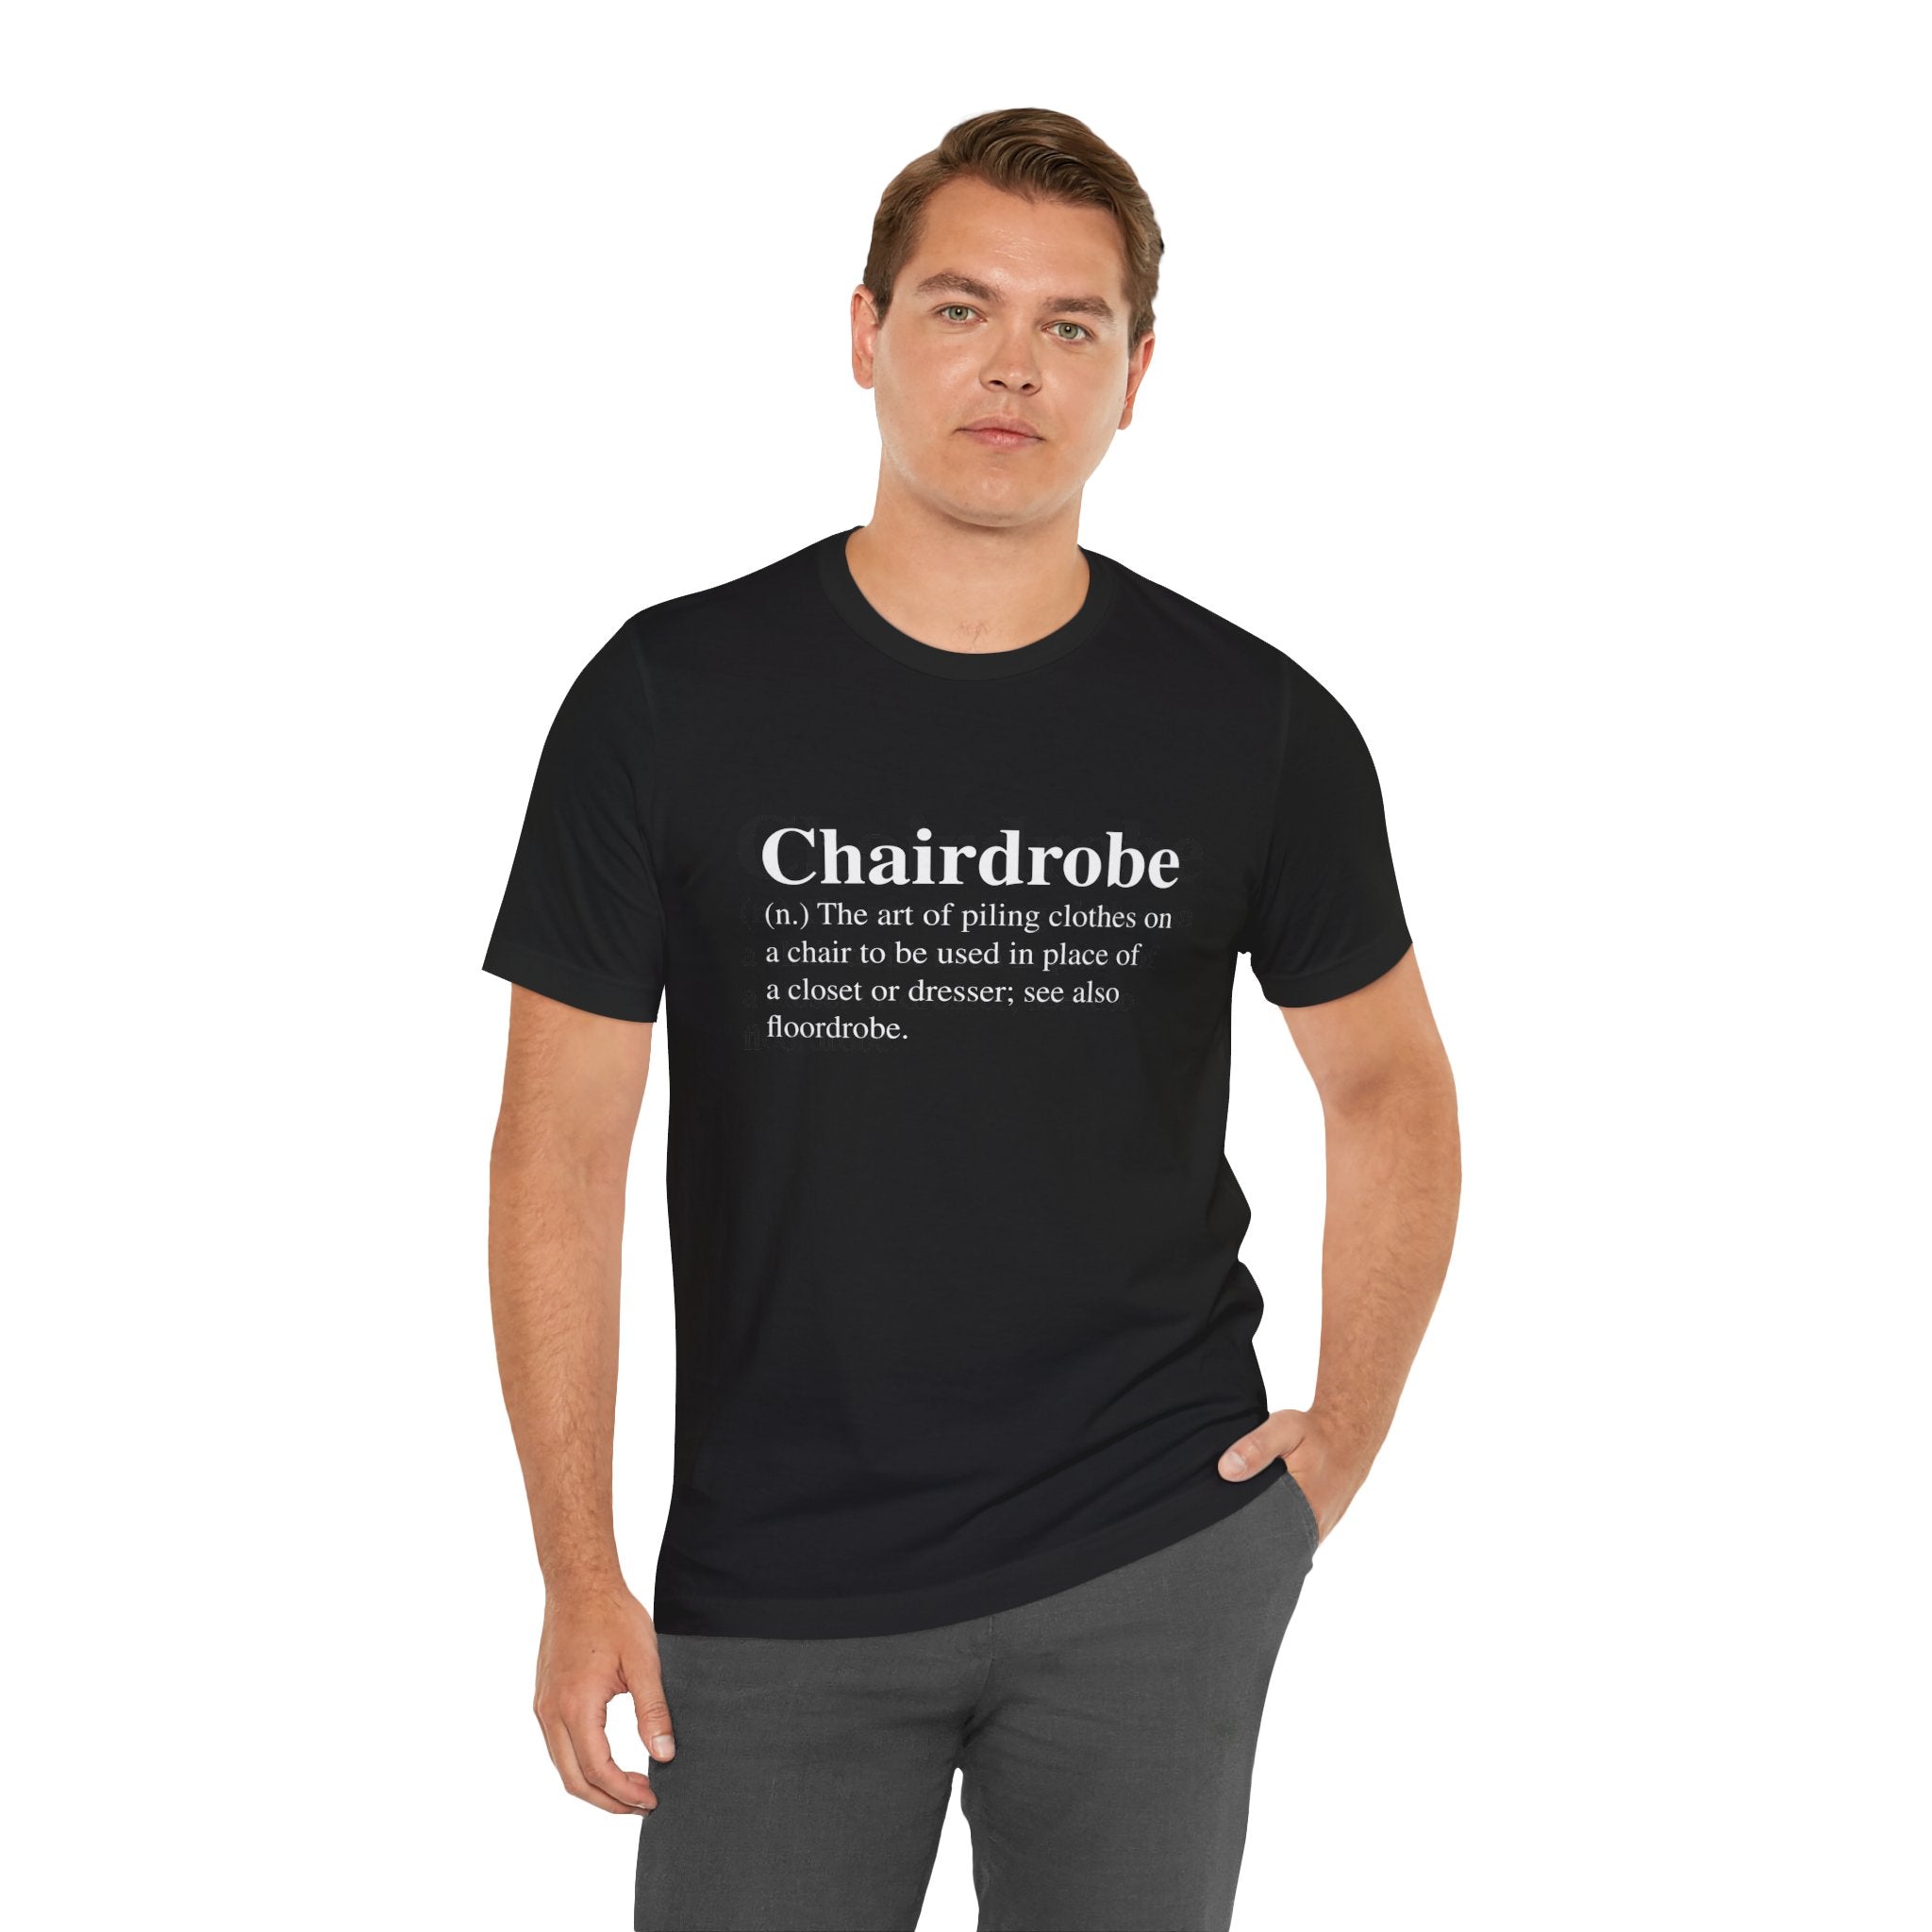 A man wearing a black, soft cotton Chairdrobe T-shirt with a humorous definition of "chairdrobe" printed in white text stands facing the camera.